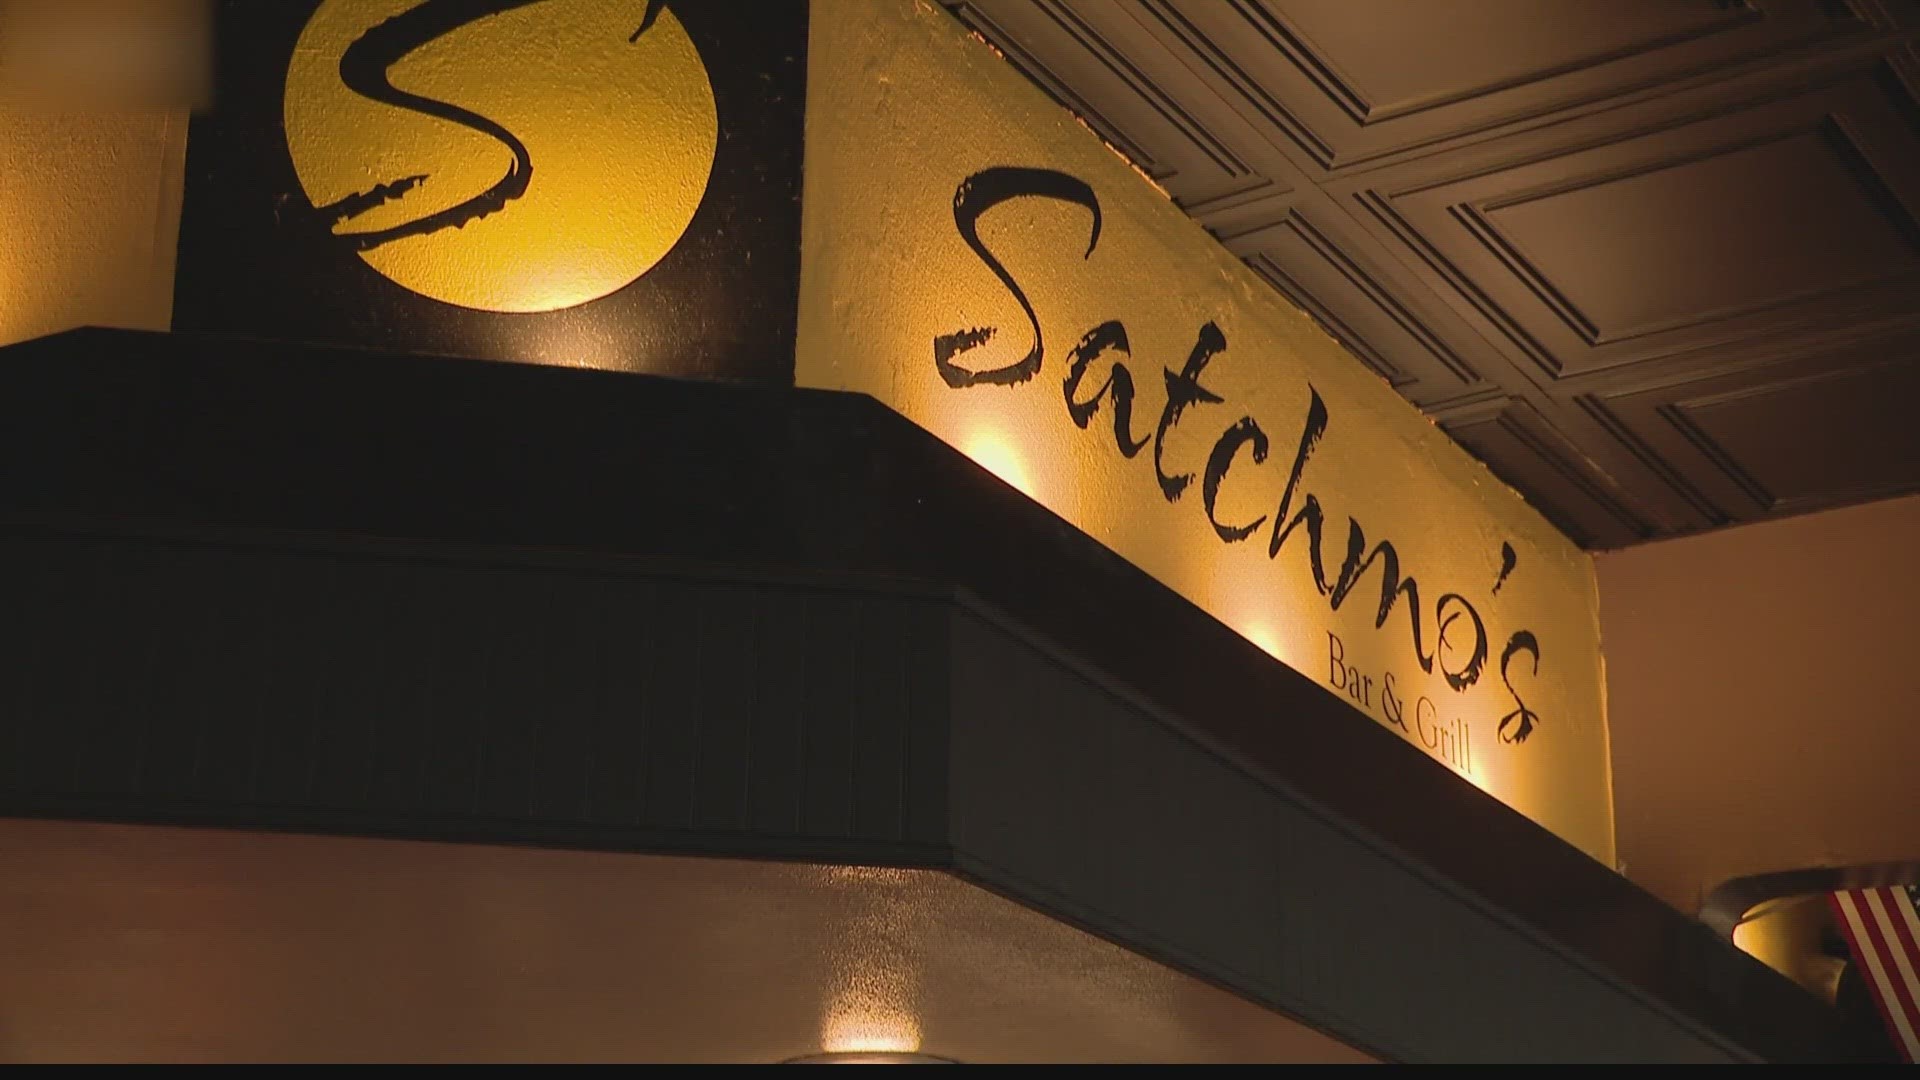 A former employee of Satchmo's Bar & Grill, owned by Republican State Sen. Ben Brown, claims he wasn't paid for overtime hours worked.